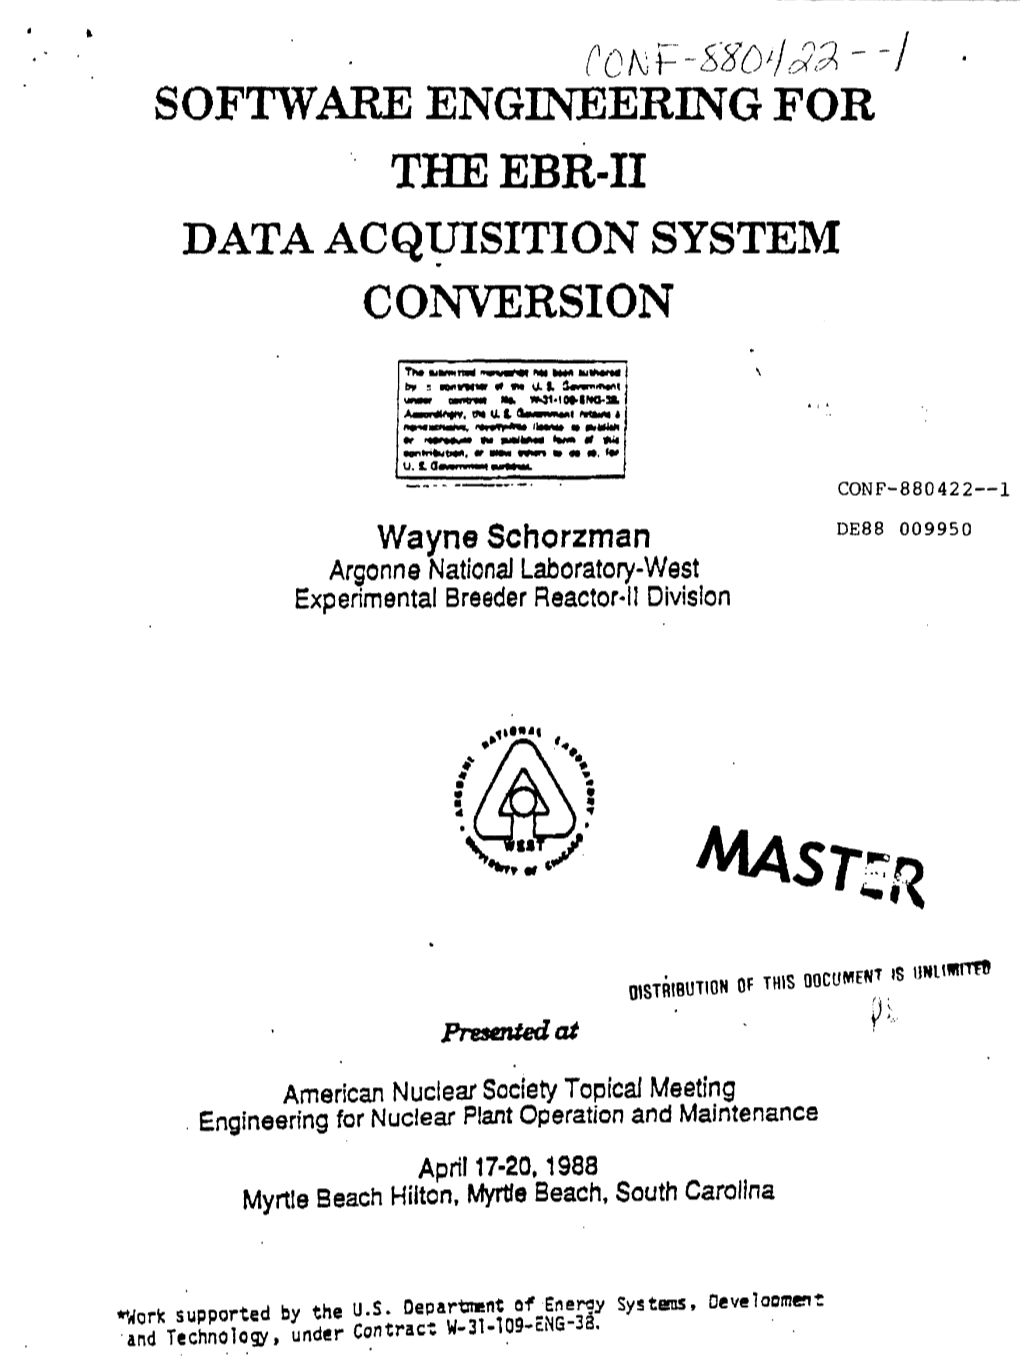 Software Engineering for Theebr-Ii Data Acquisition System Conversion